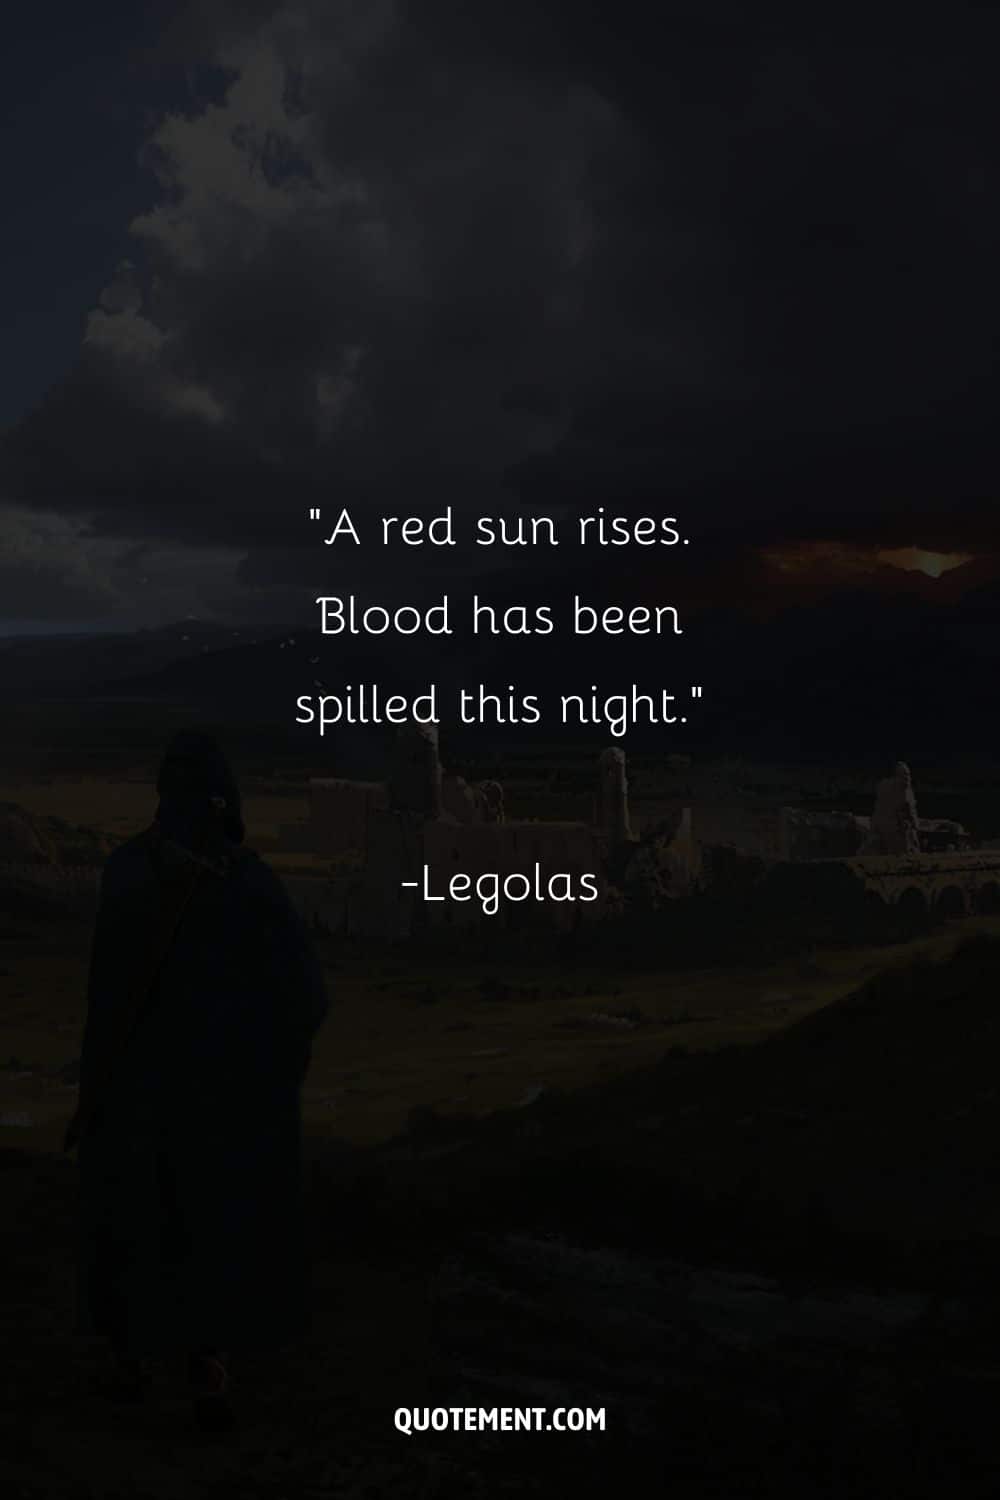 A red sun rises. Blood has been spilled this night